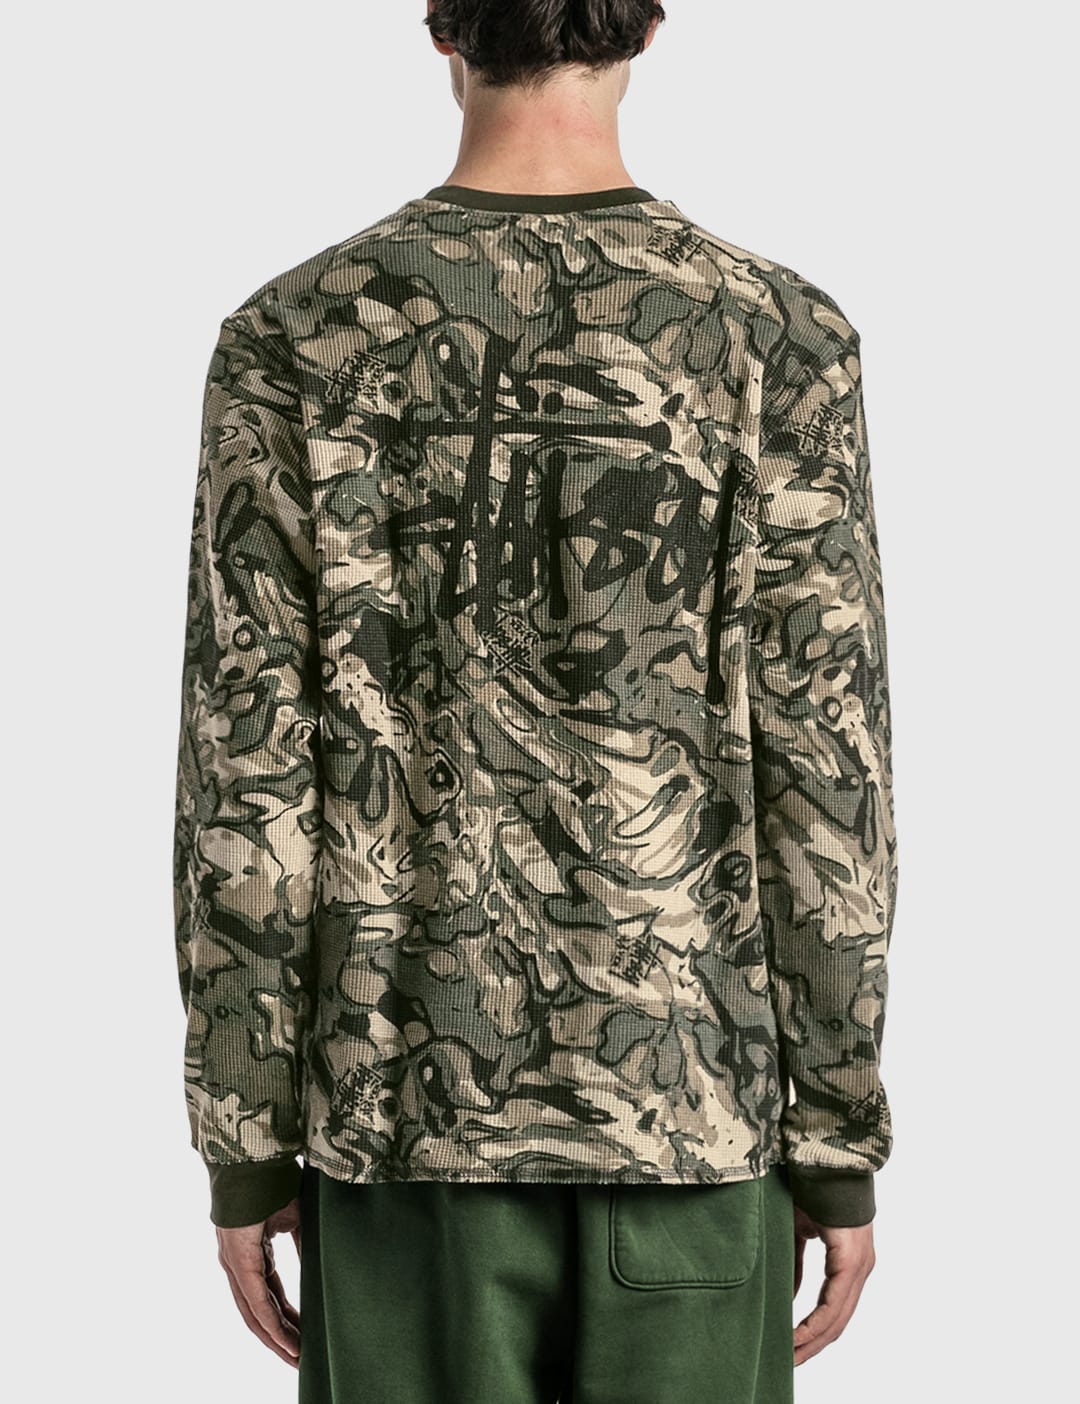 Stüssy - Basic Stock Long Sleeve Thermal | HBX - Globally Curated 